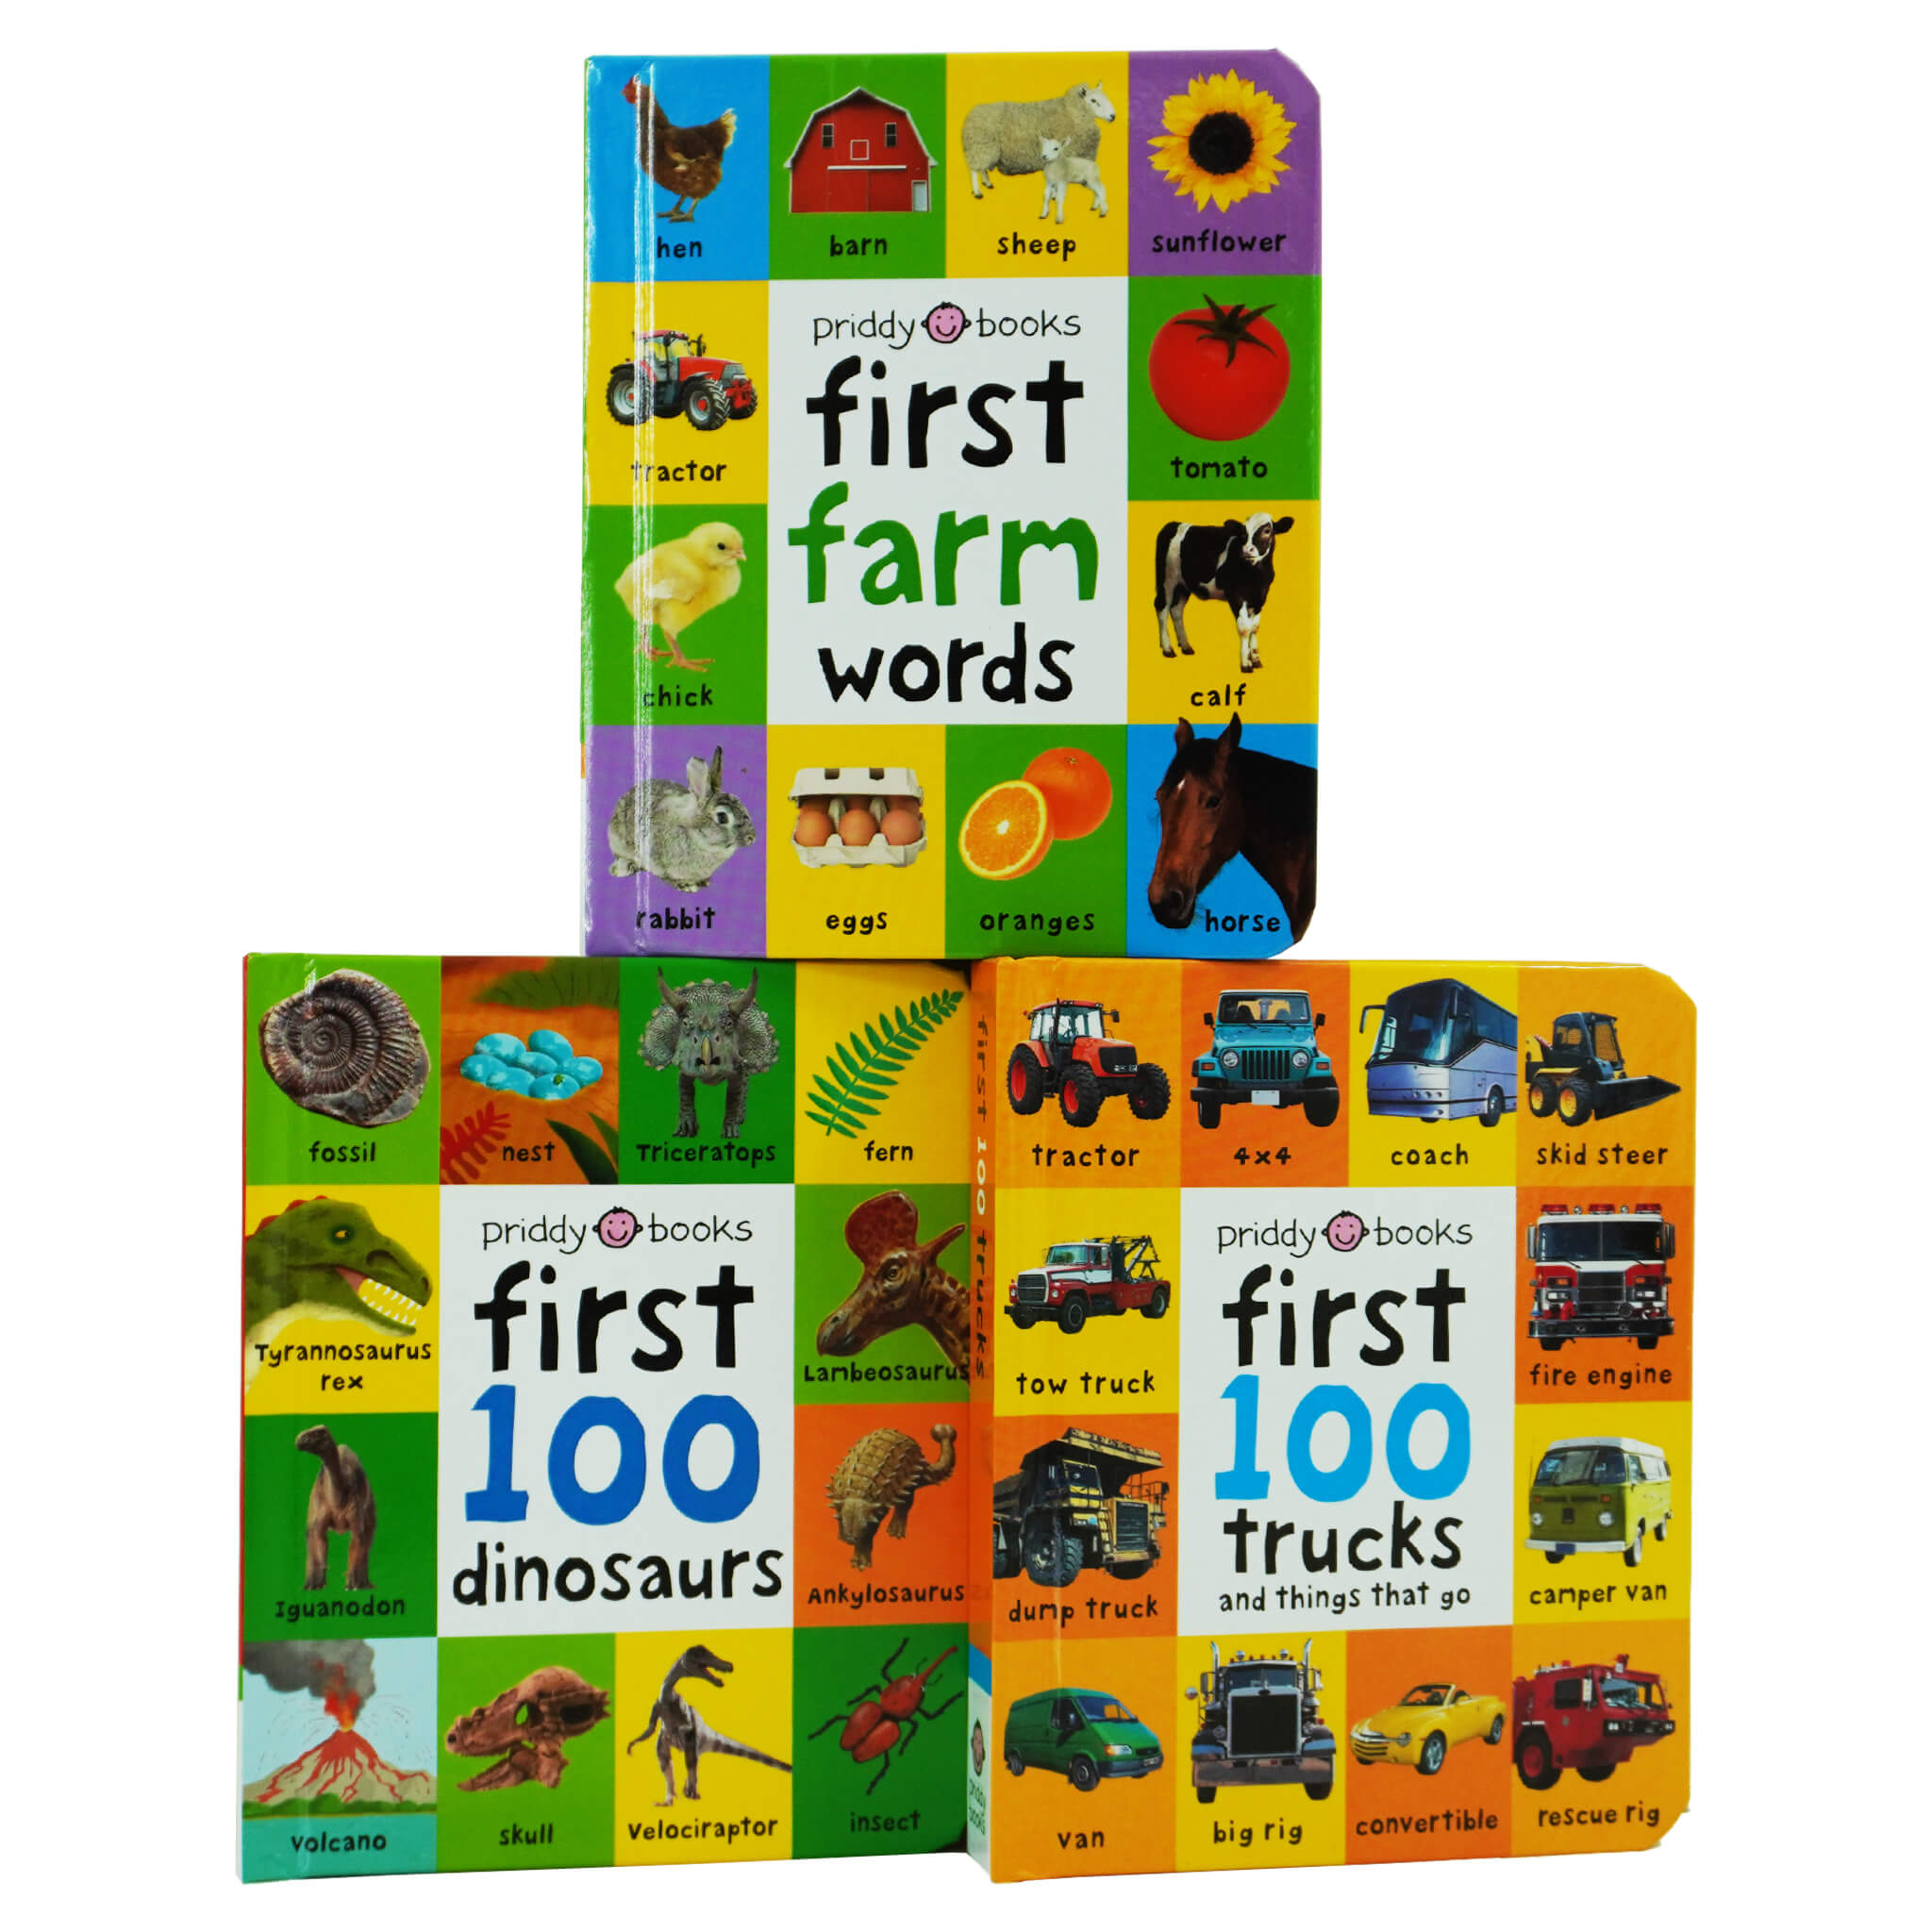 First 100 series 3 Books (Trucks, Dinosaurs & First Farm Words) Children Collection Box Set By Roger Priddy - Ages 0-5 - Board Book